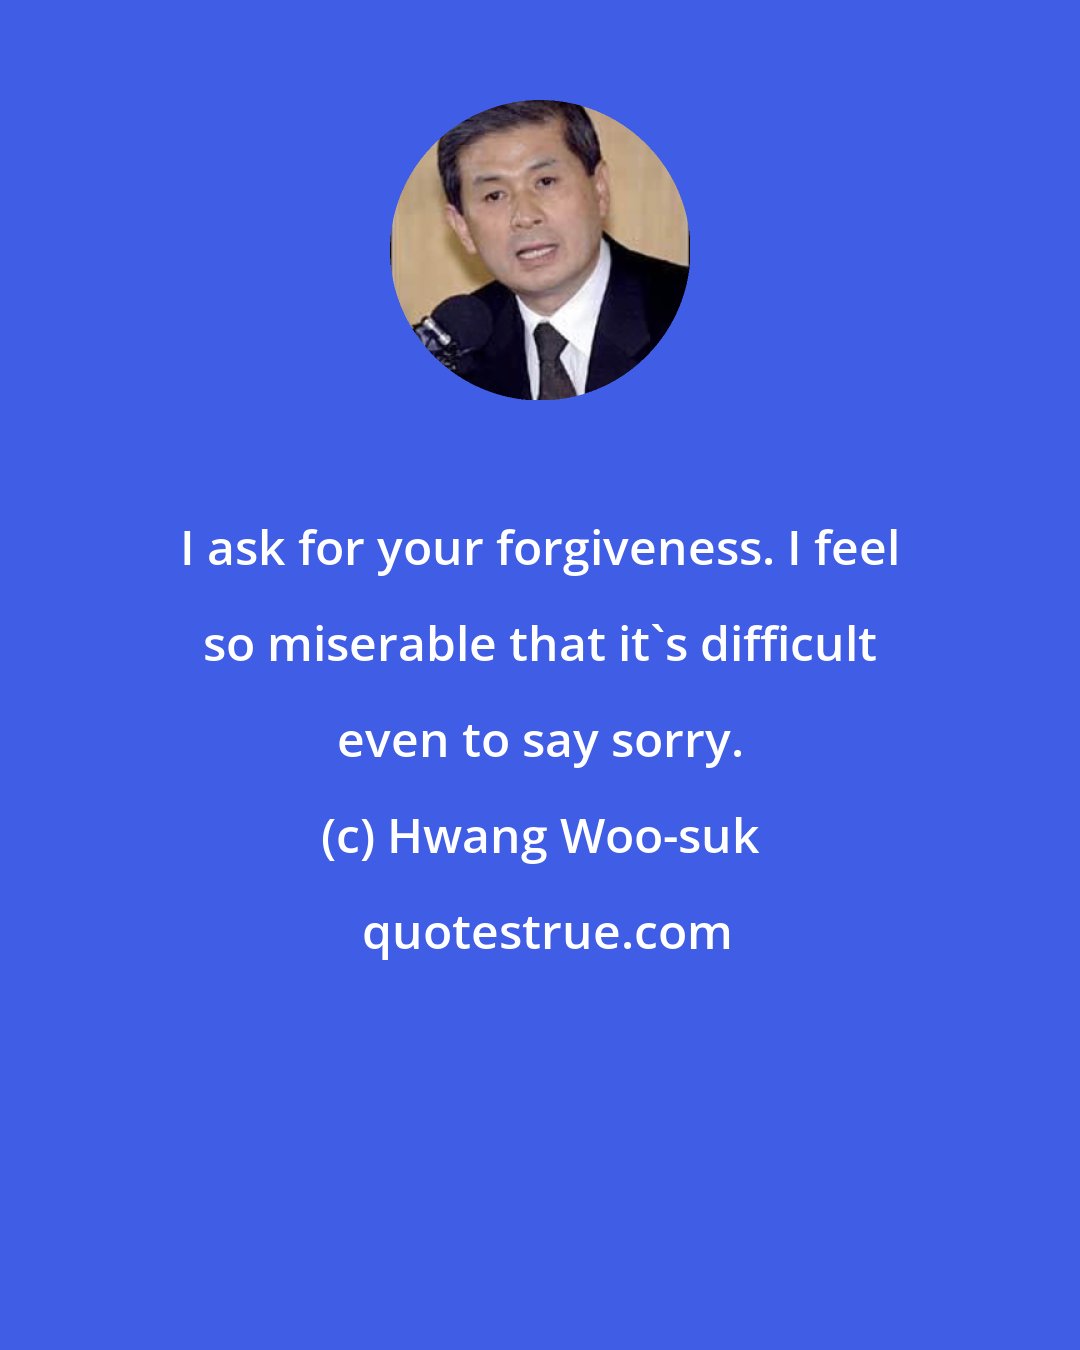 Hwang Woo-suk: I ask for your forgiveness. I feel so miserable that it's difficult even to say sorry.